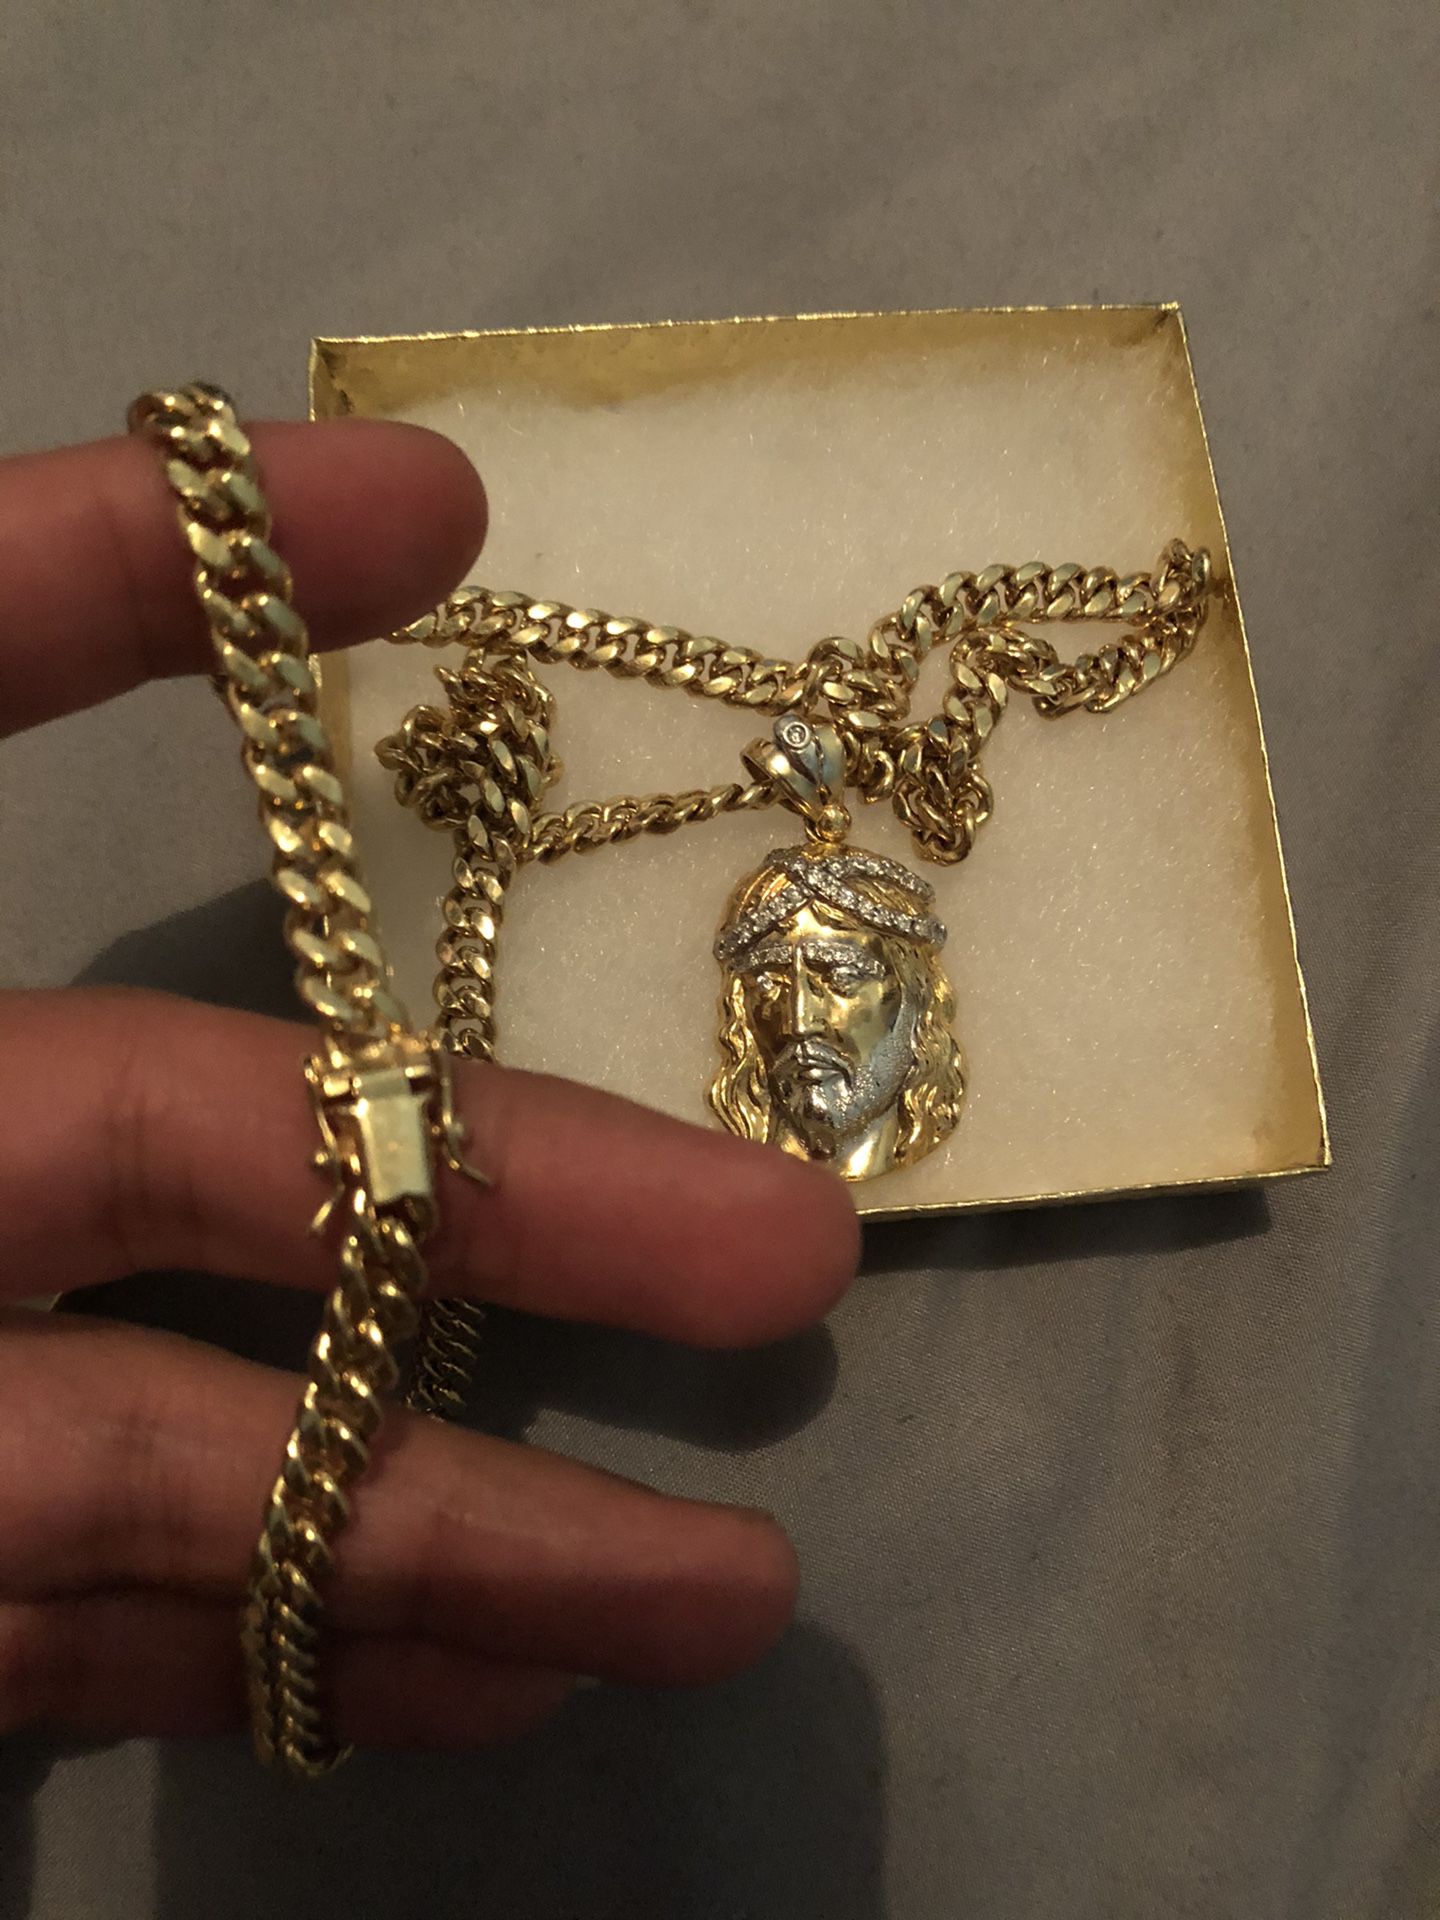 Brand new 14k gold chain and pendant